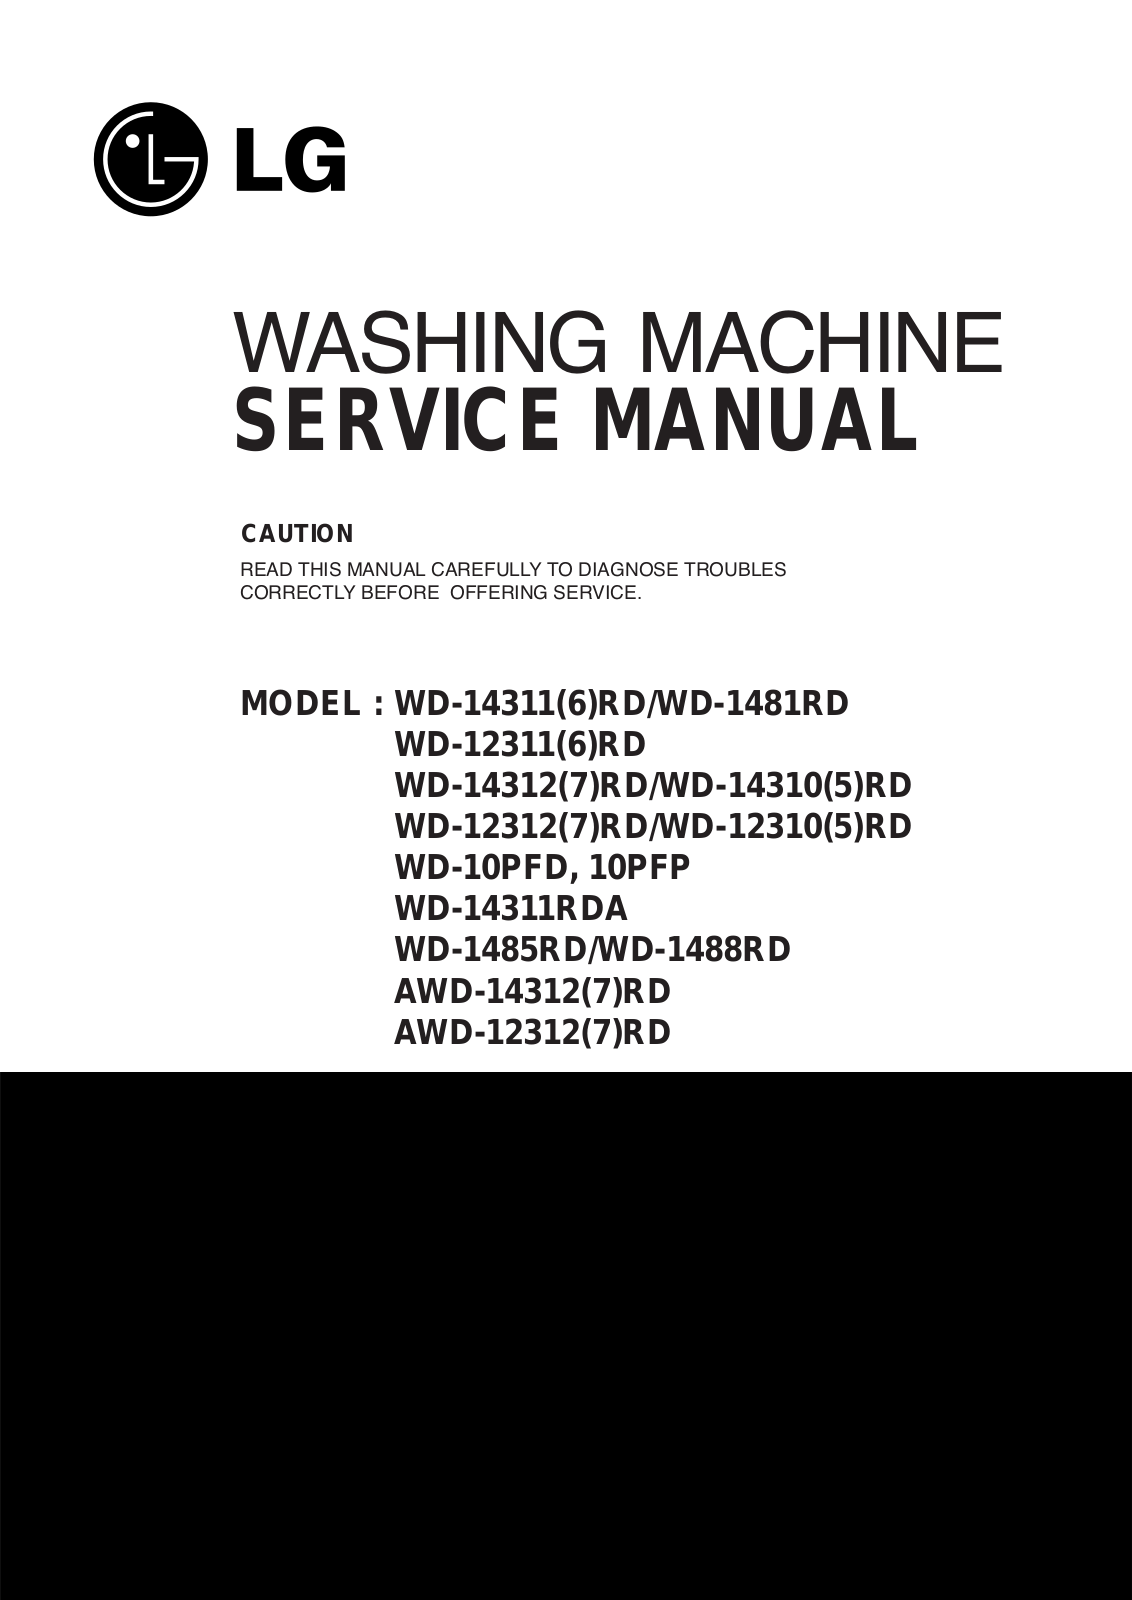 LG WD-1488RD, WD-123116RD, WD-143105RD, AWD-143127RD, WD-143127RD User Manual